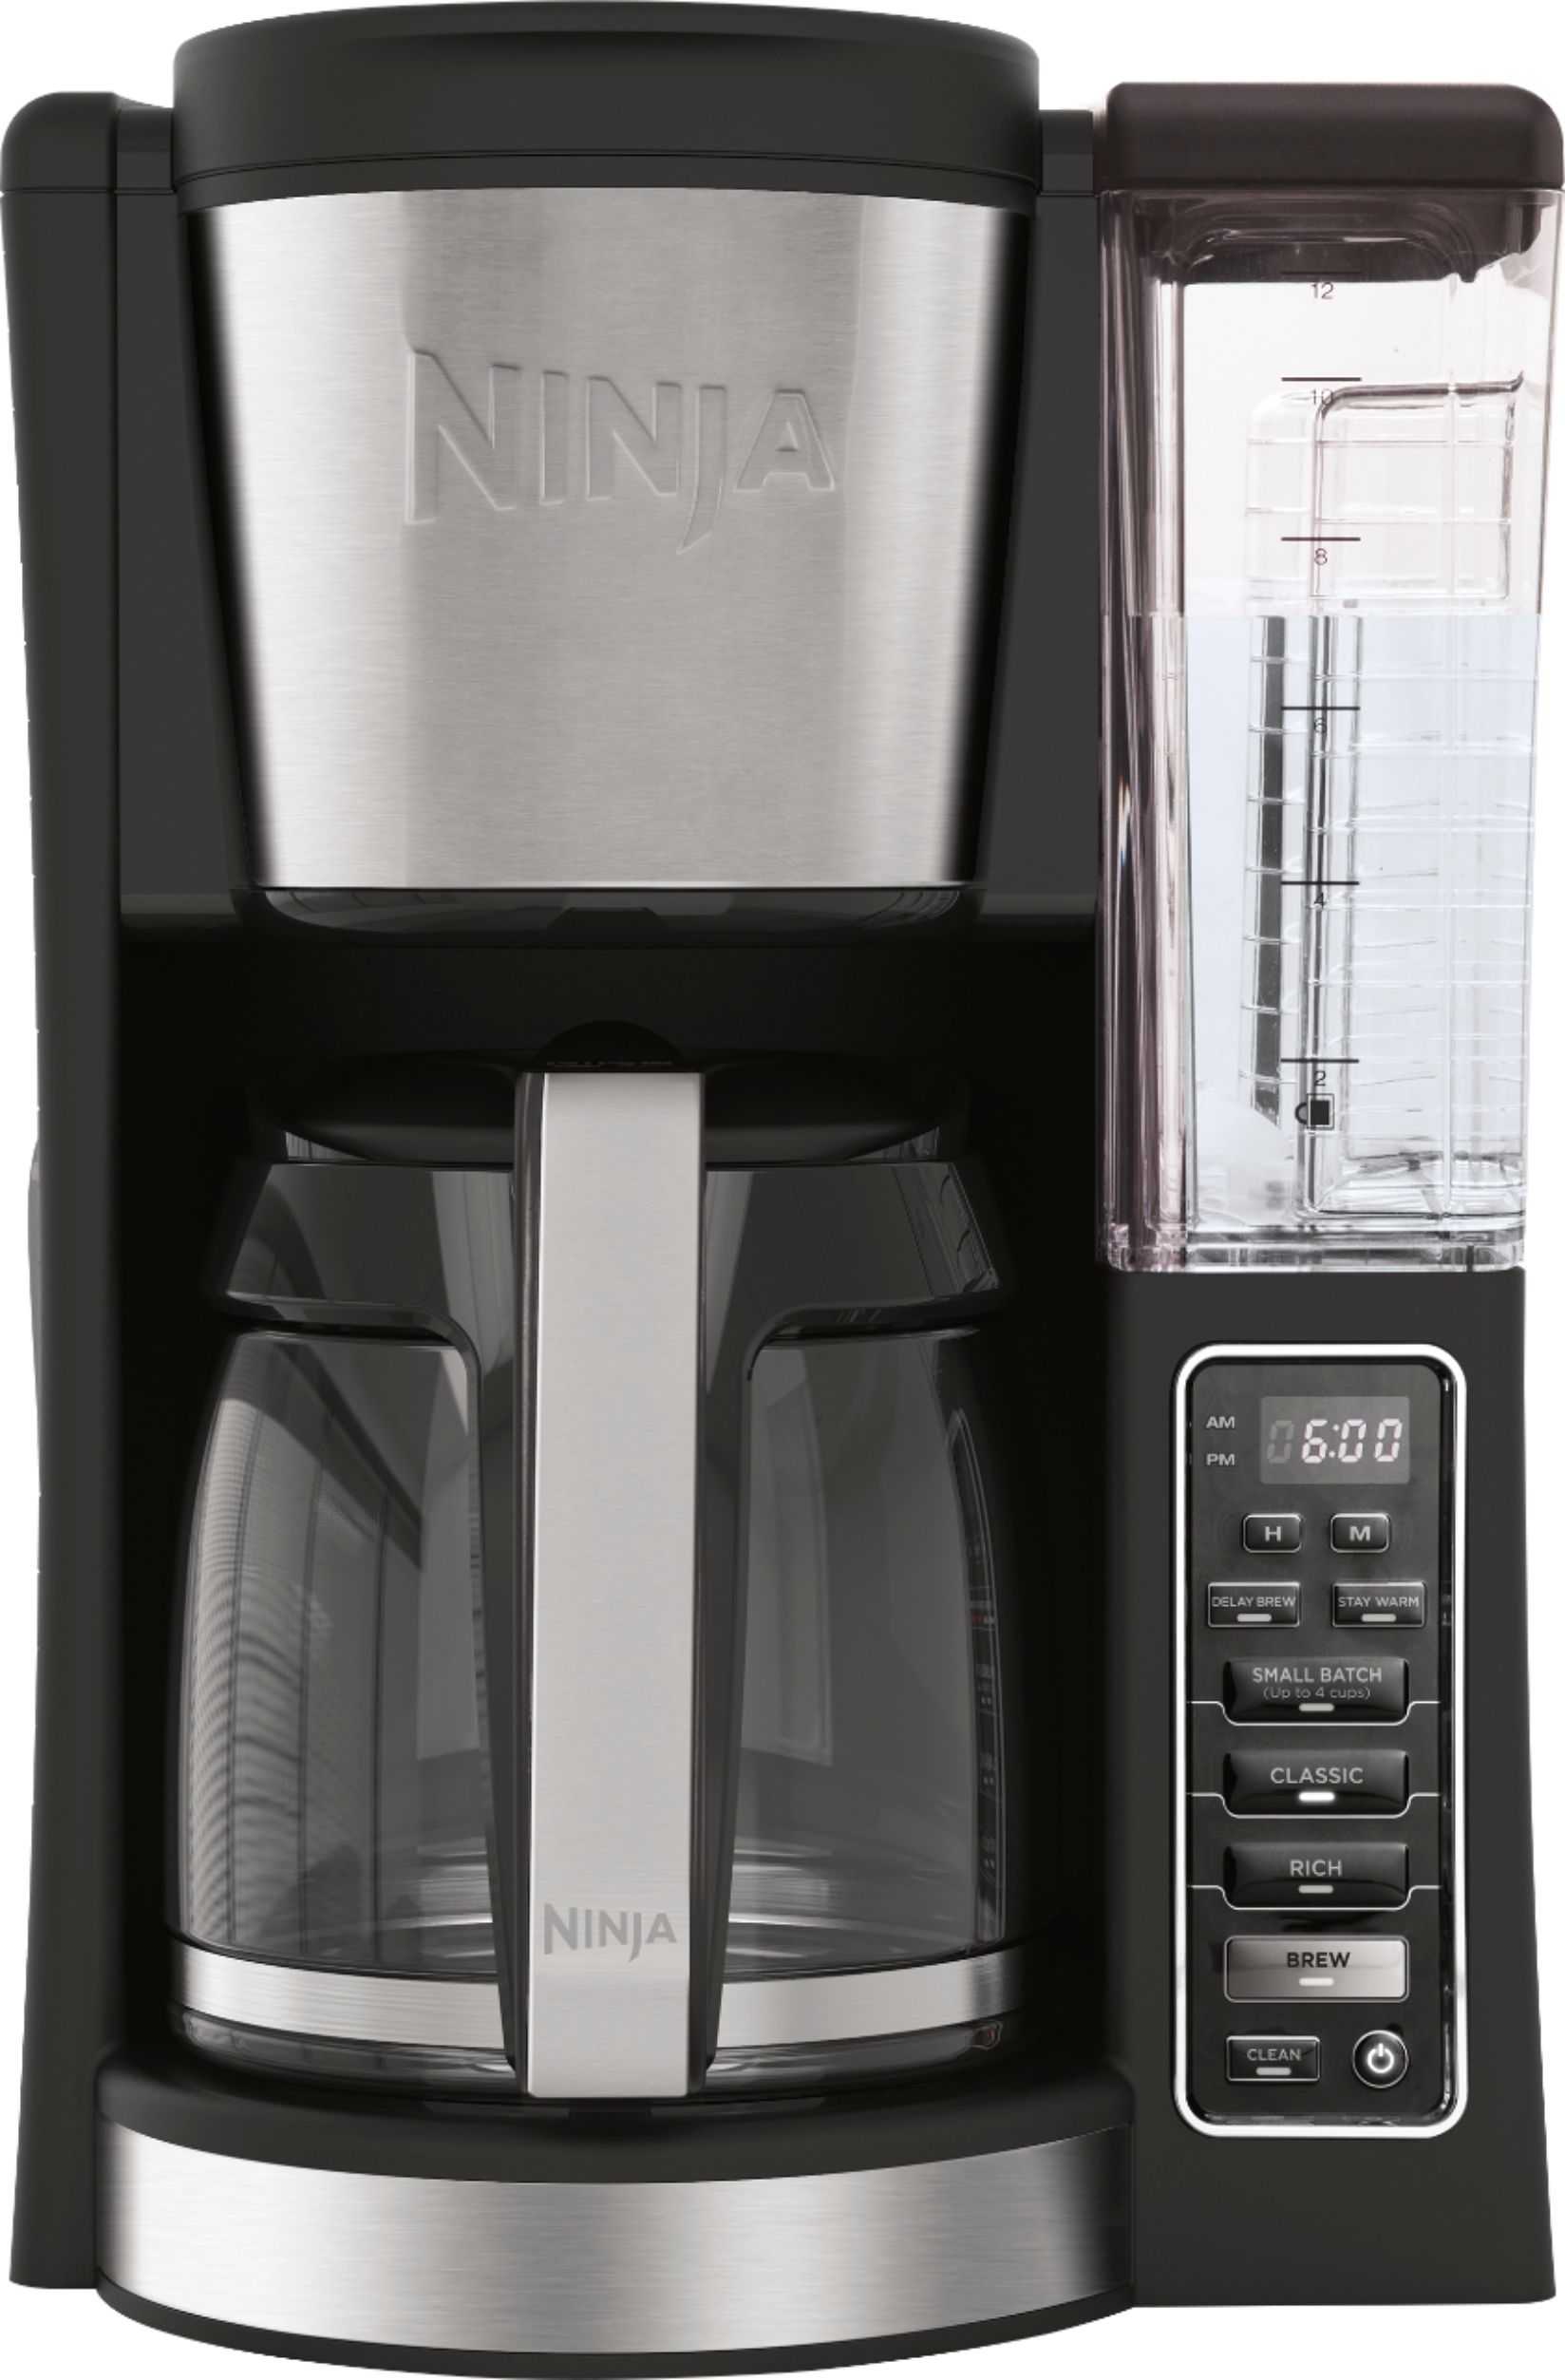 Ninja Coffee Maker Replacement Parts Image of Coffee and Tea